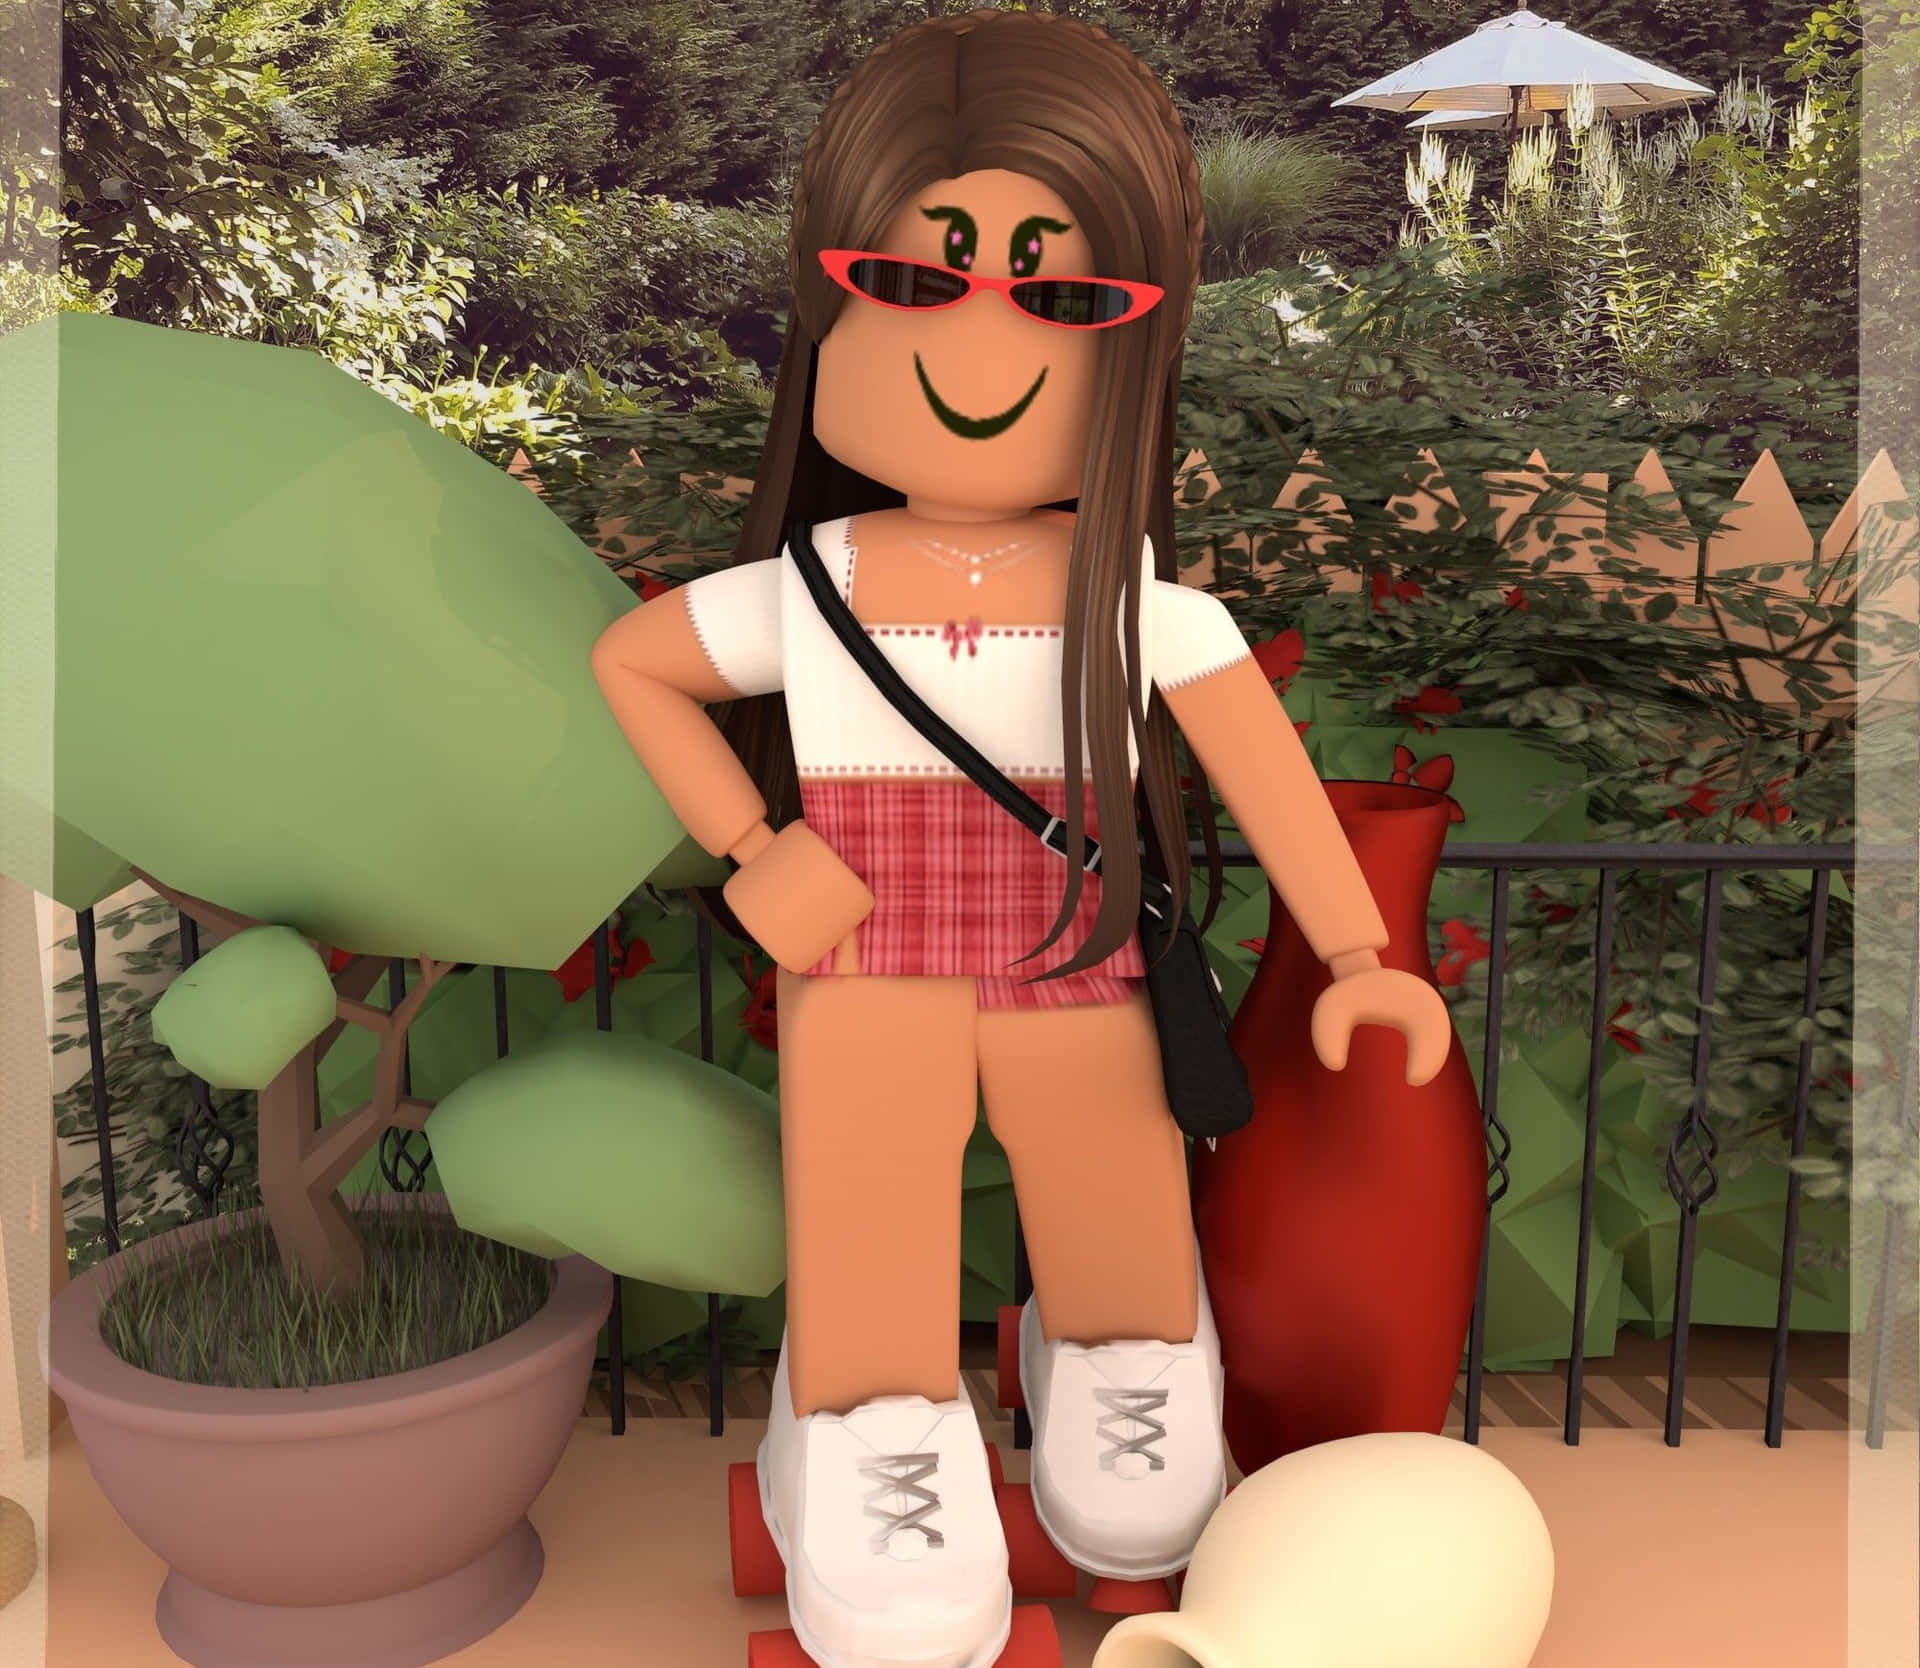 “Experience Sweet Adventures In Cute Roblox!”